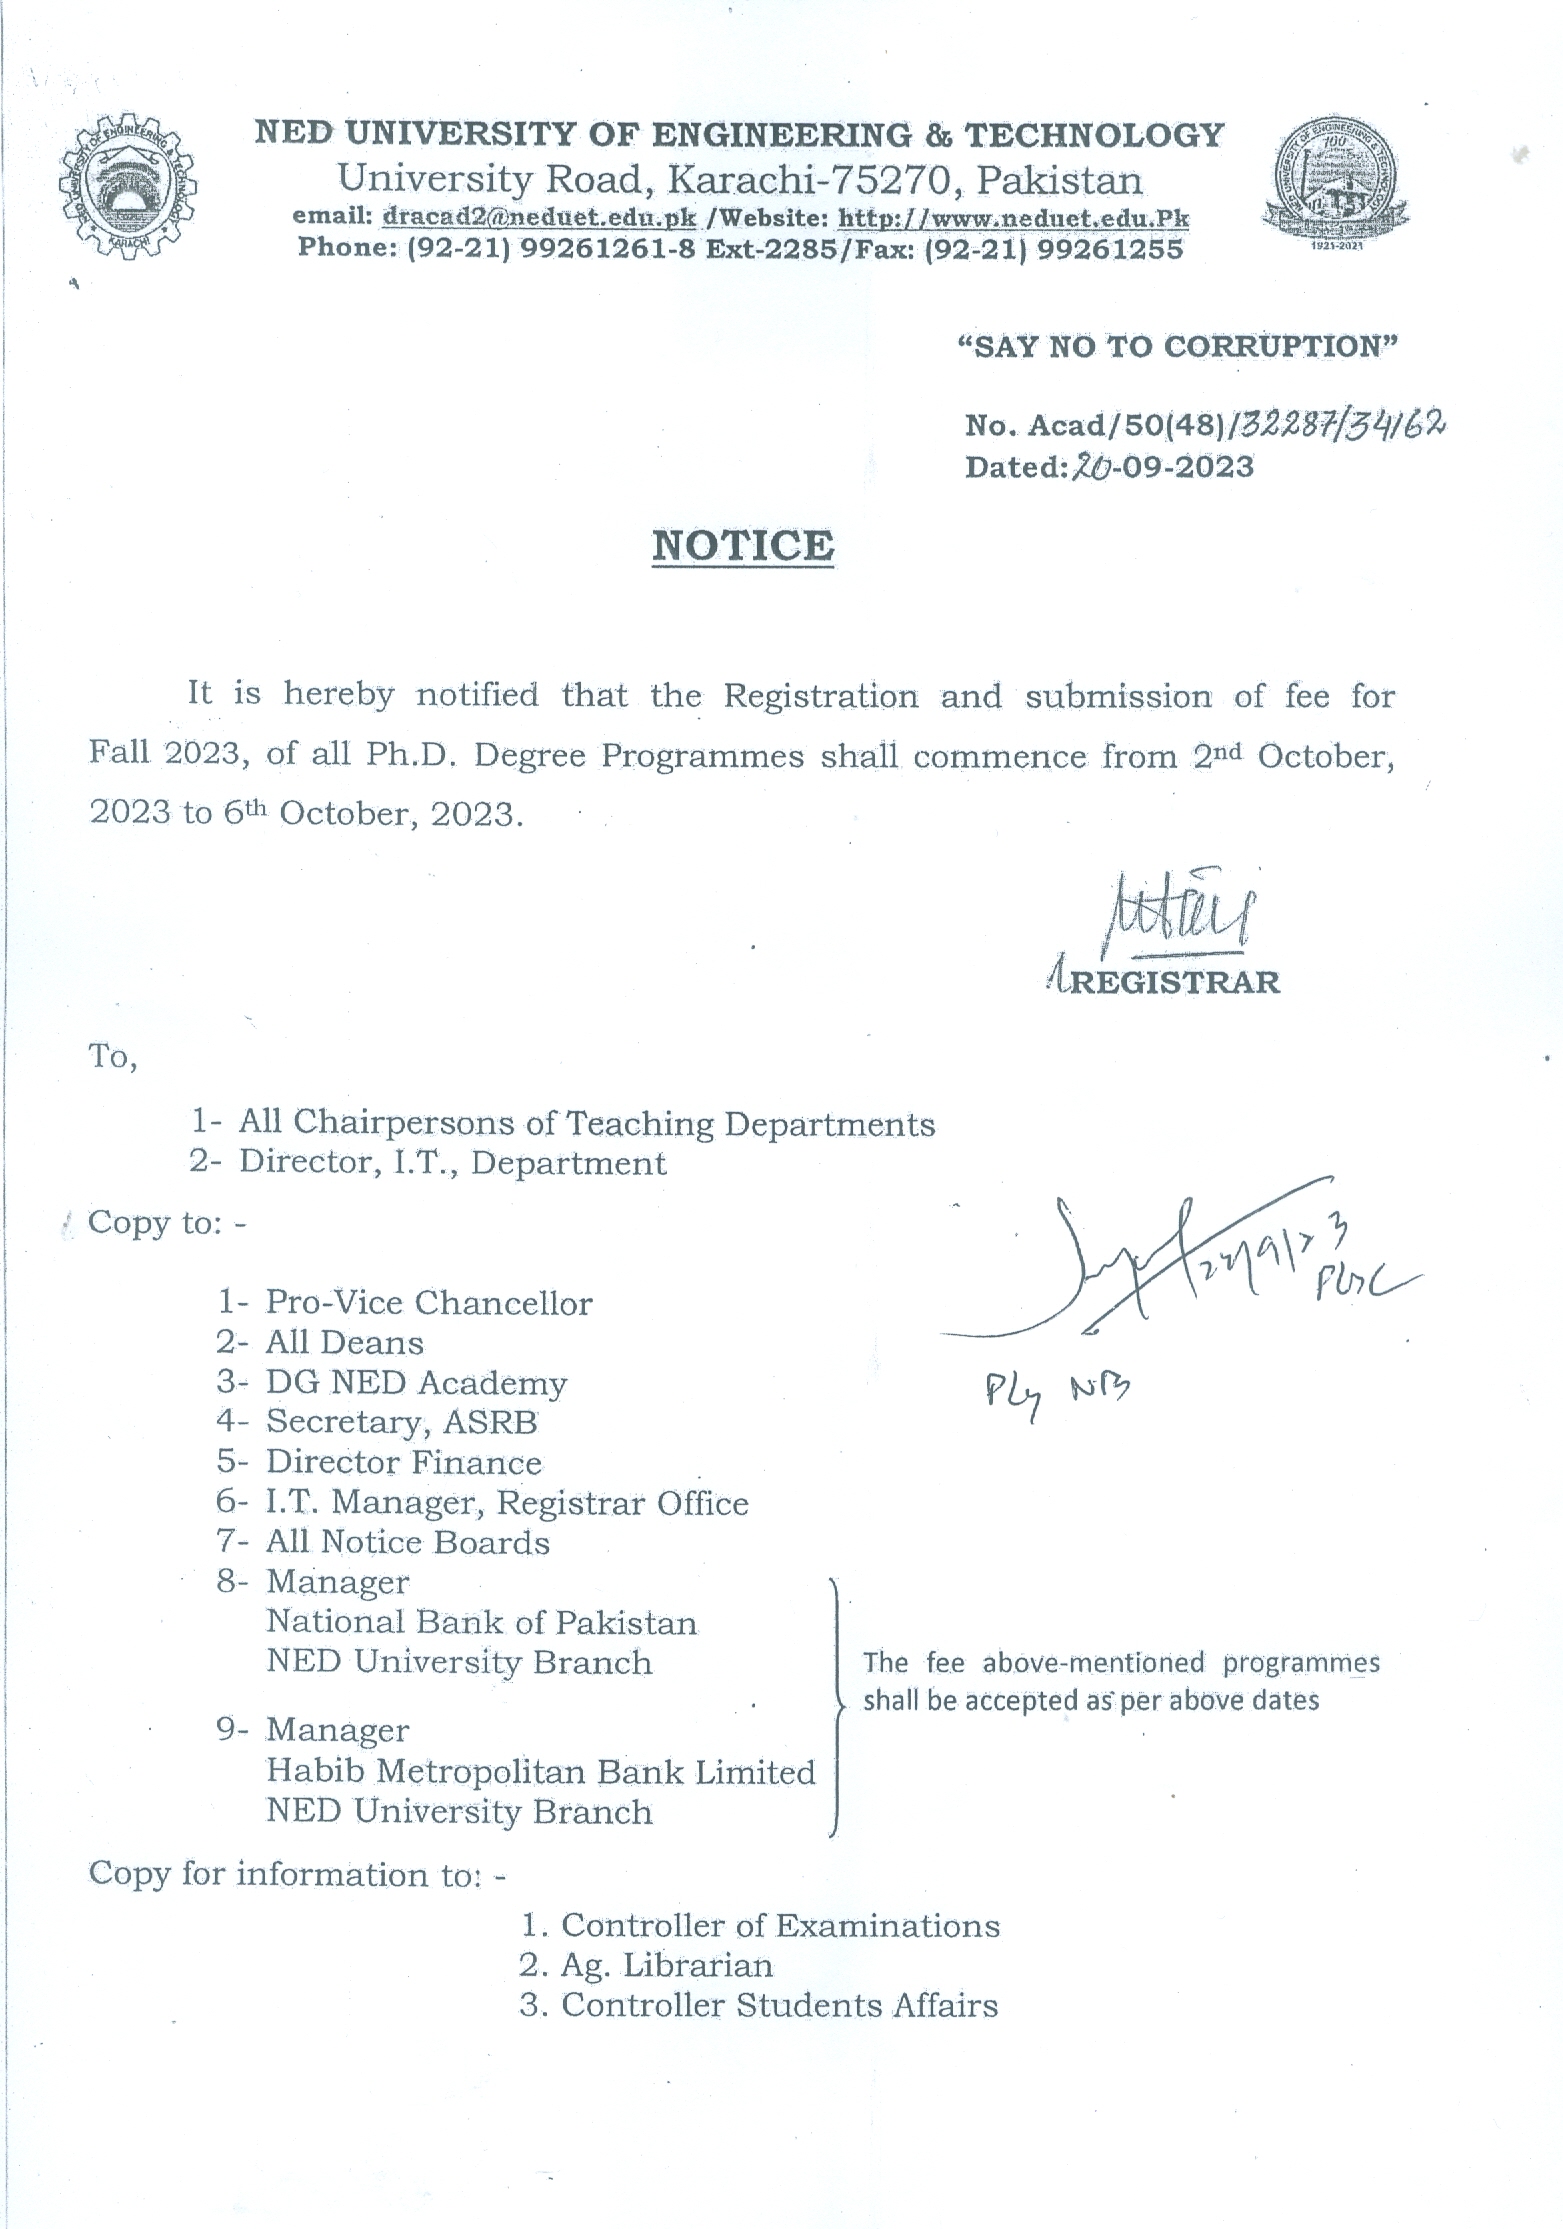 Registration  and Submission of phd Fee Notice